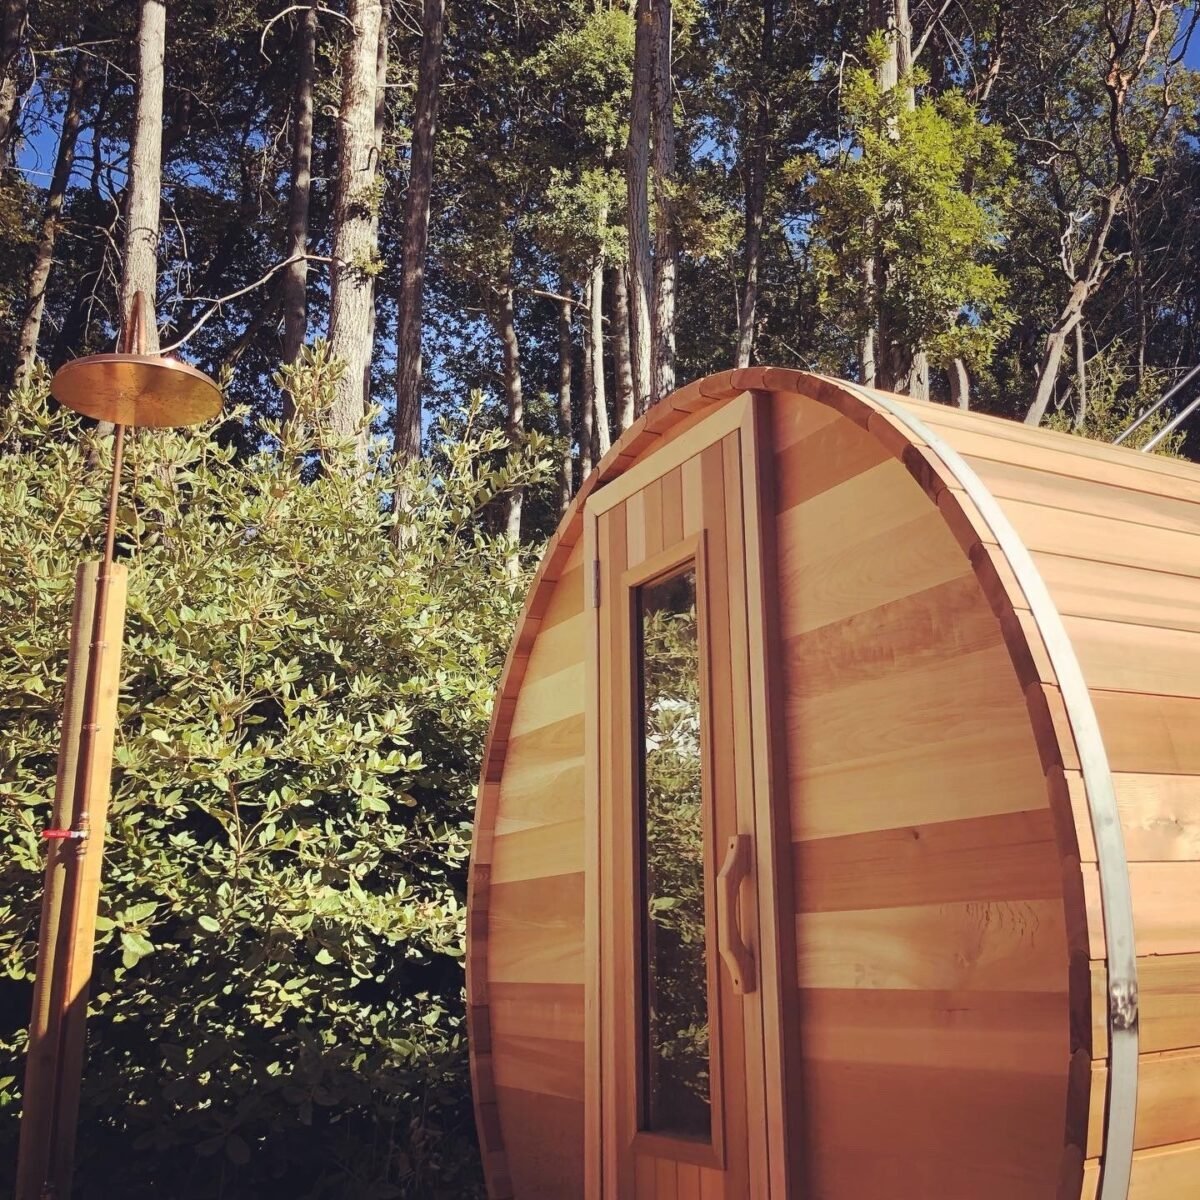 Installing a Sauna at Home – An Investment in Health and Wellness